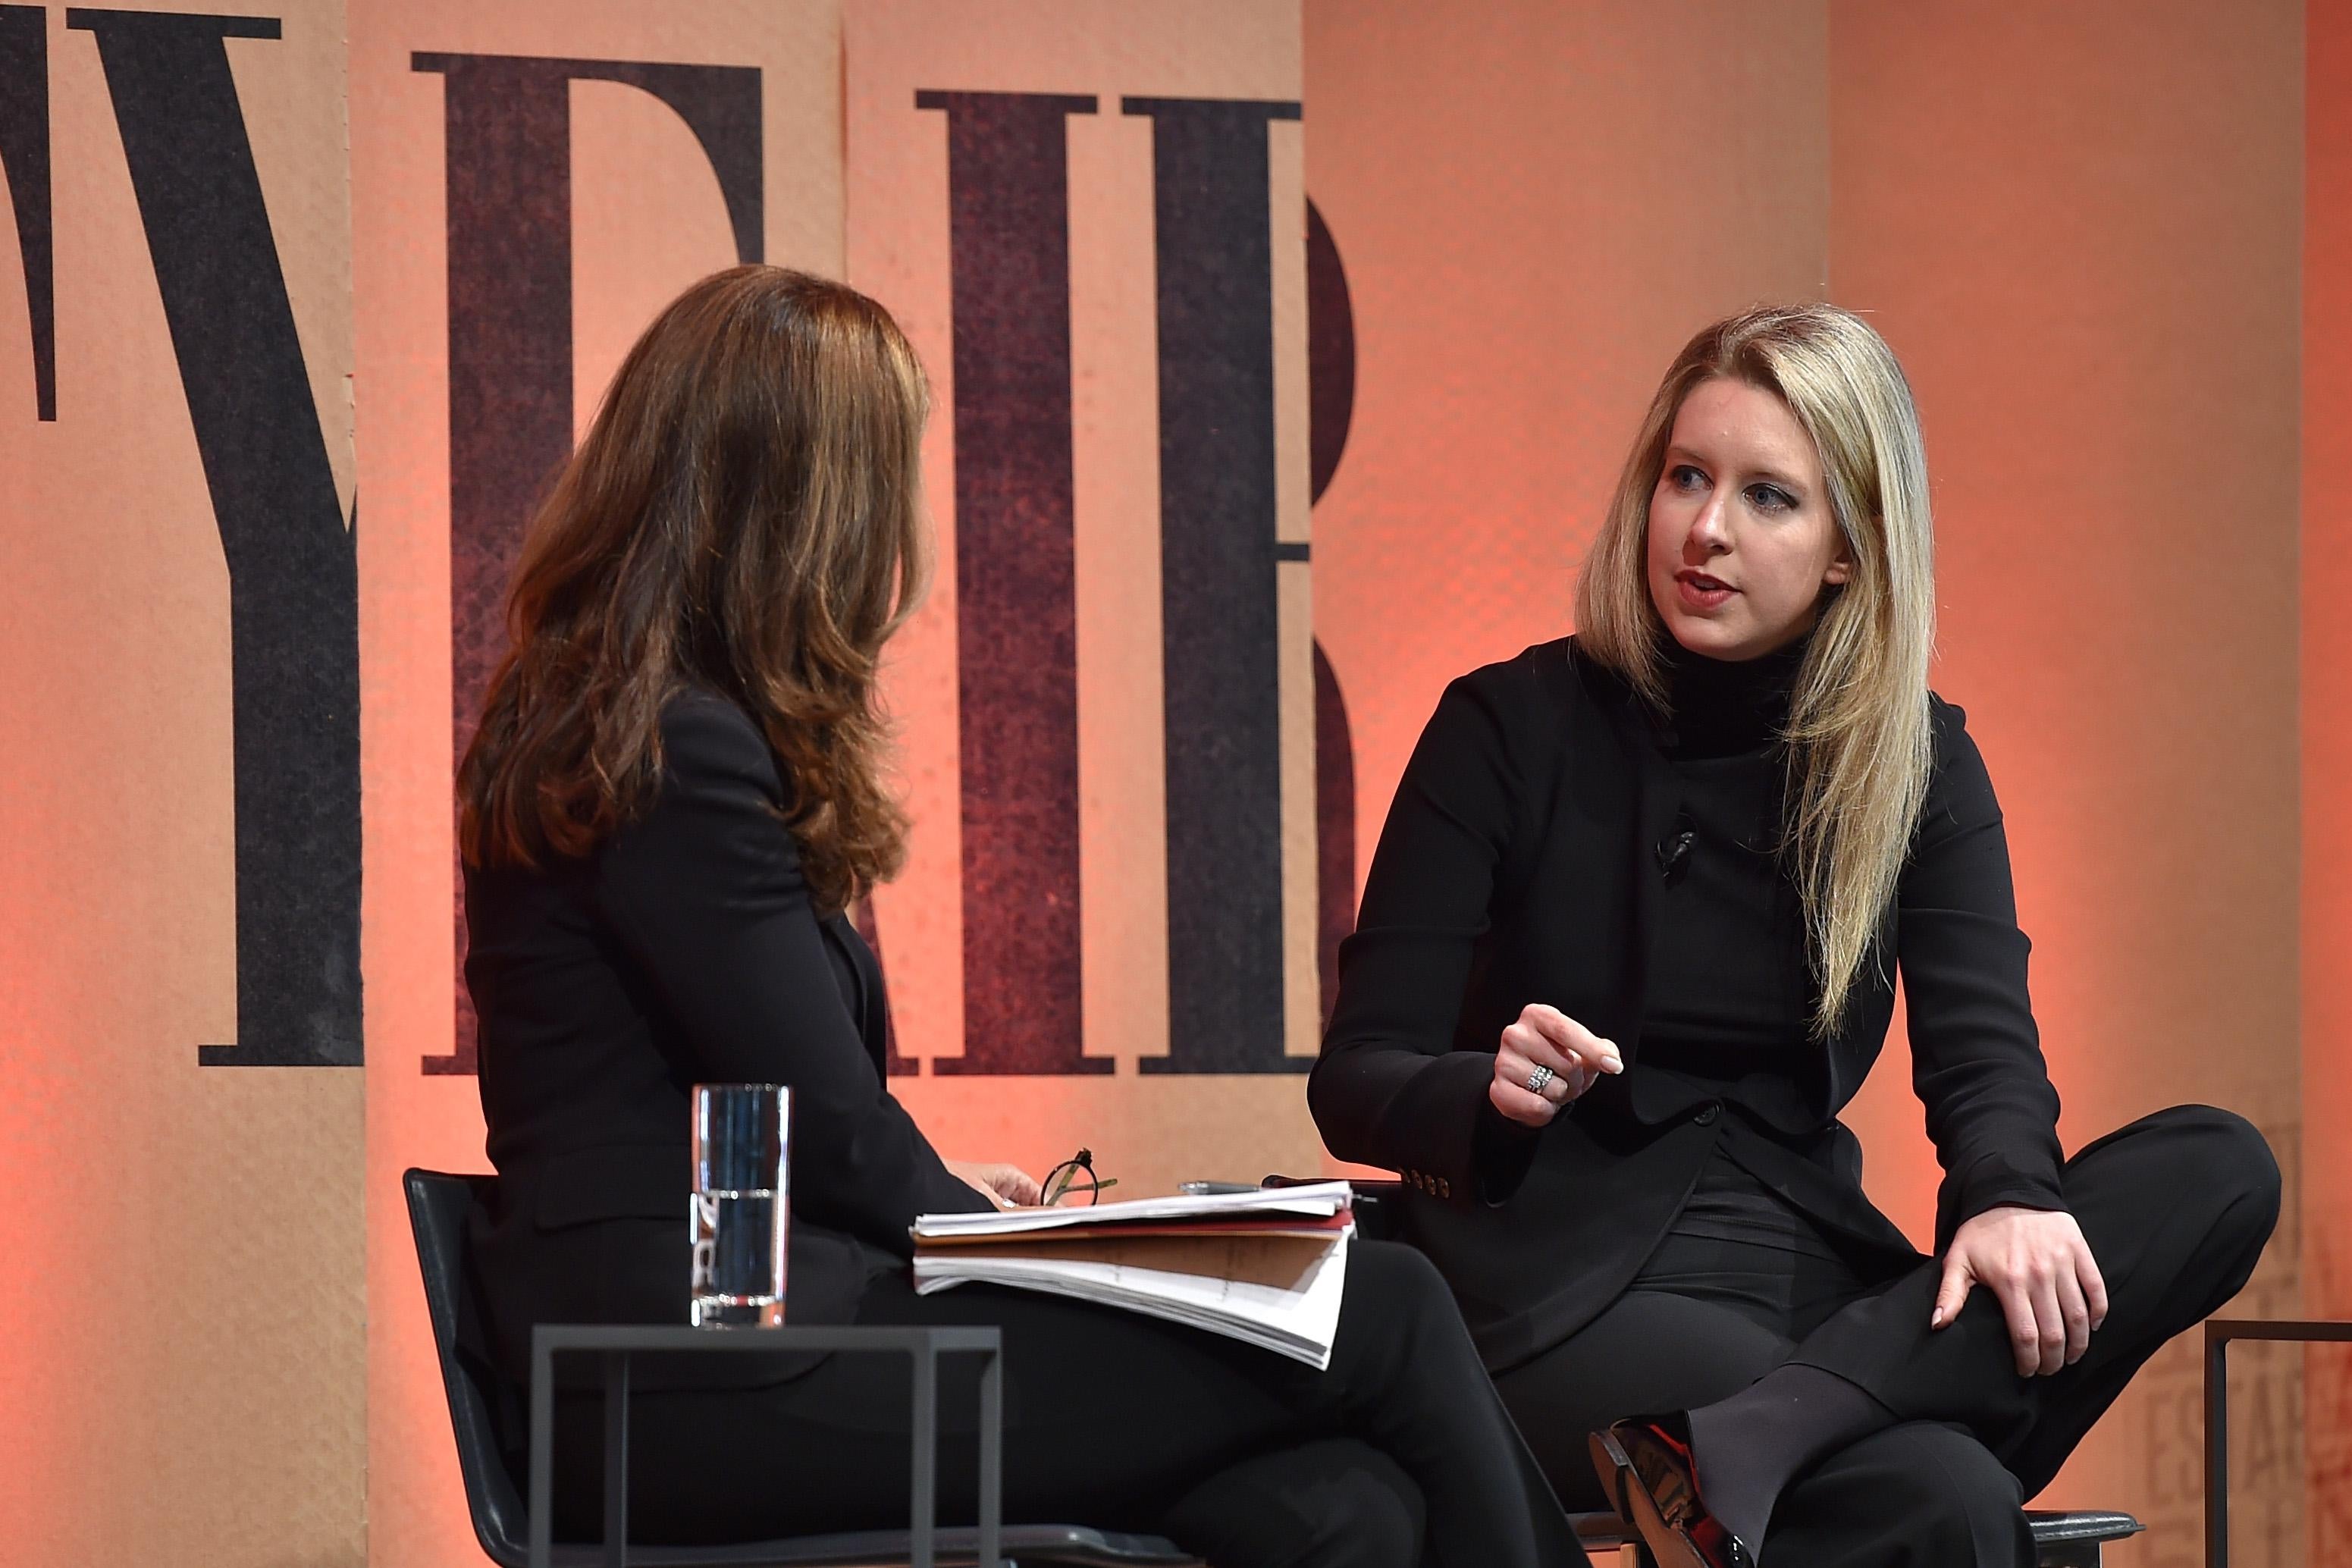 Elizabeth Holmes seated on a stage before an orange backdrop with Vanity Fair lettering